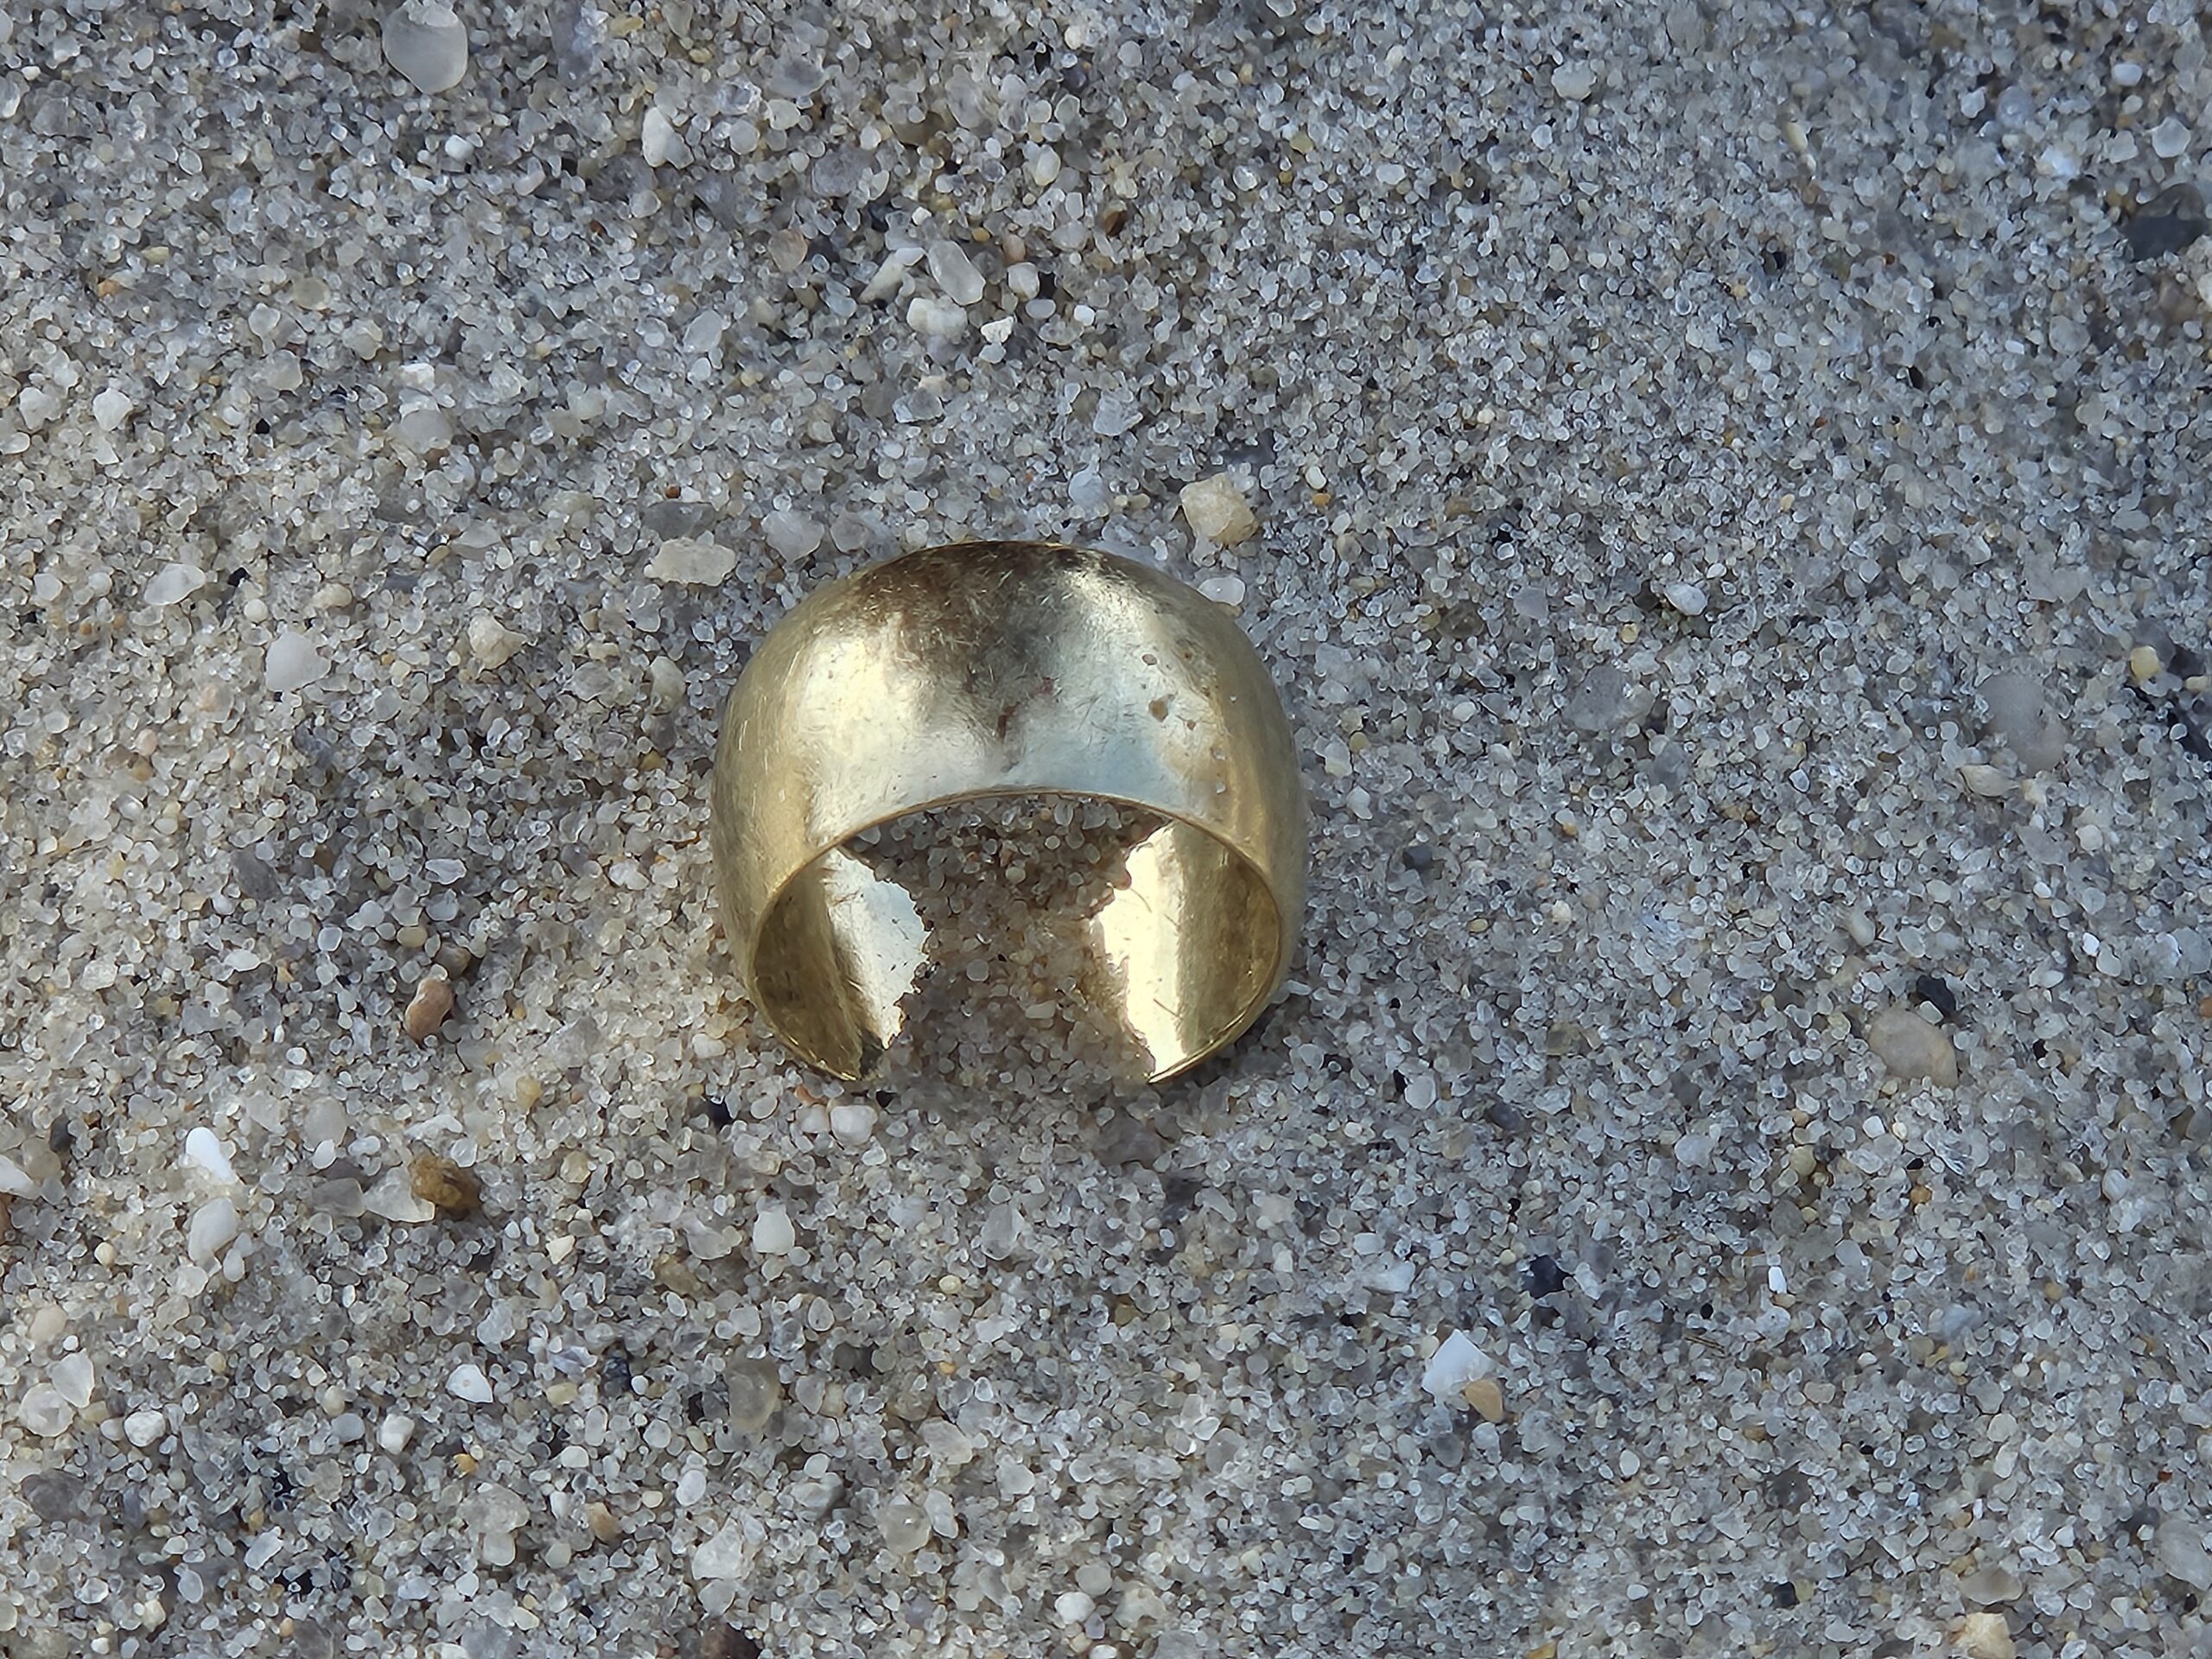 Jeff Laag, Cape May Ring Finder, Metal Detecting Service, Cape May Ring Finder